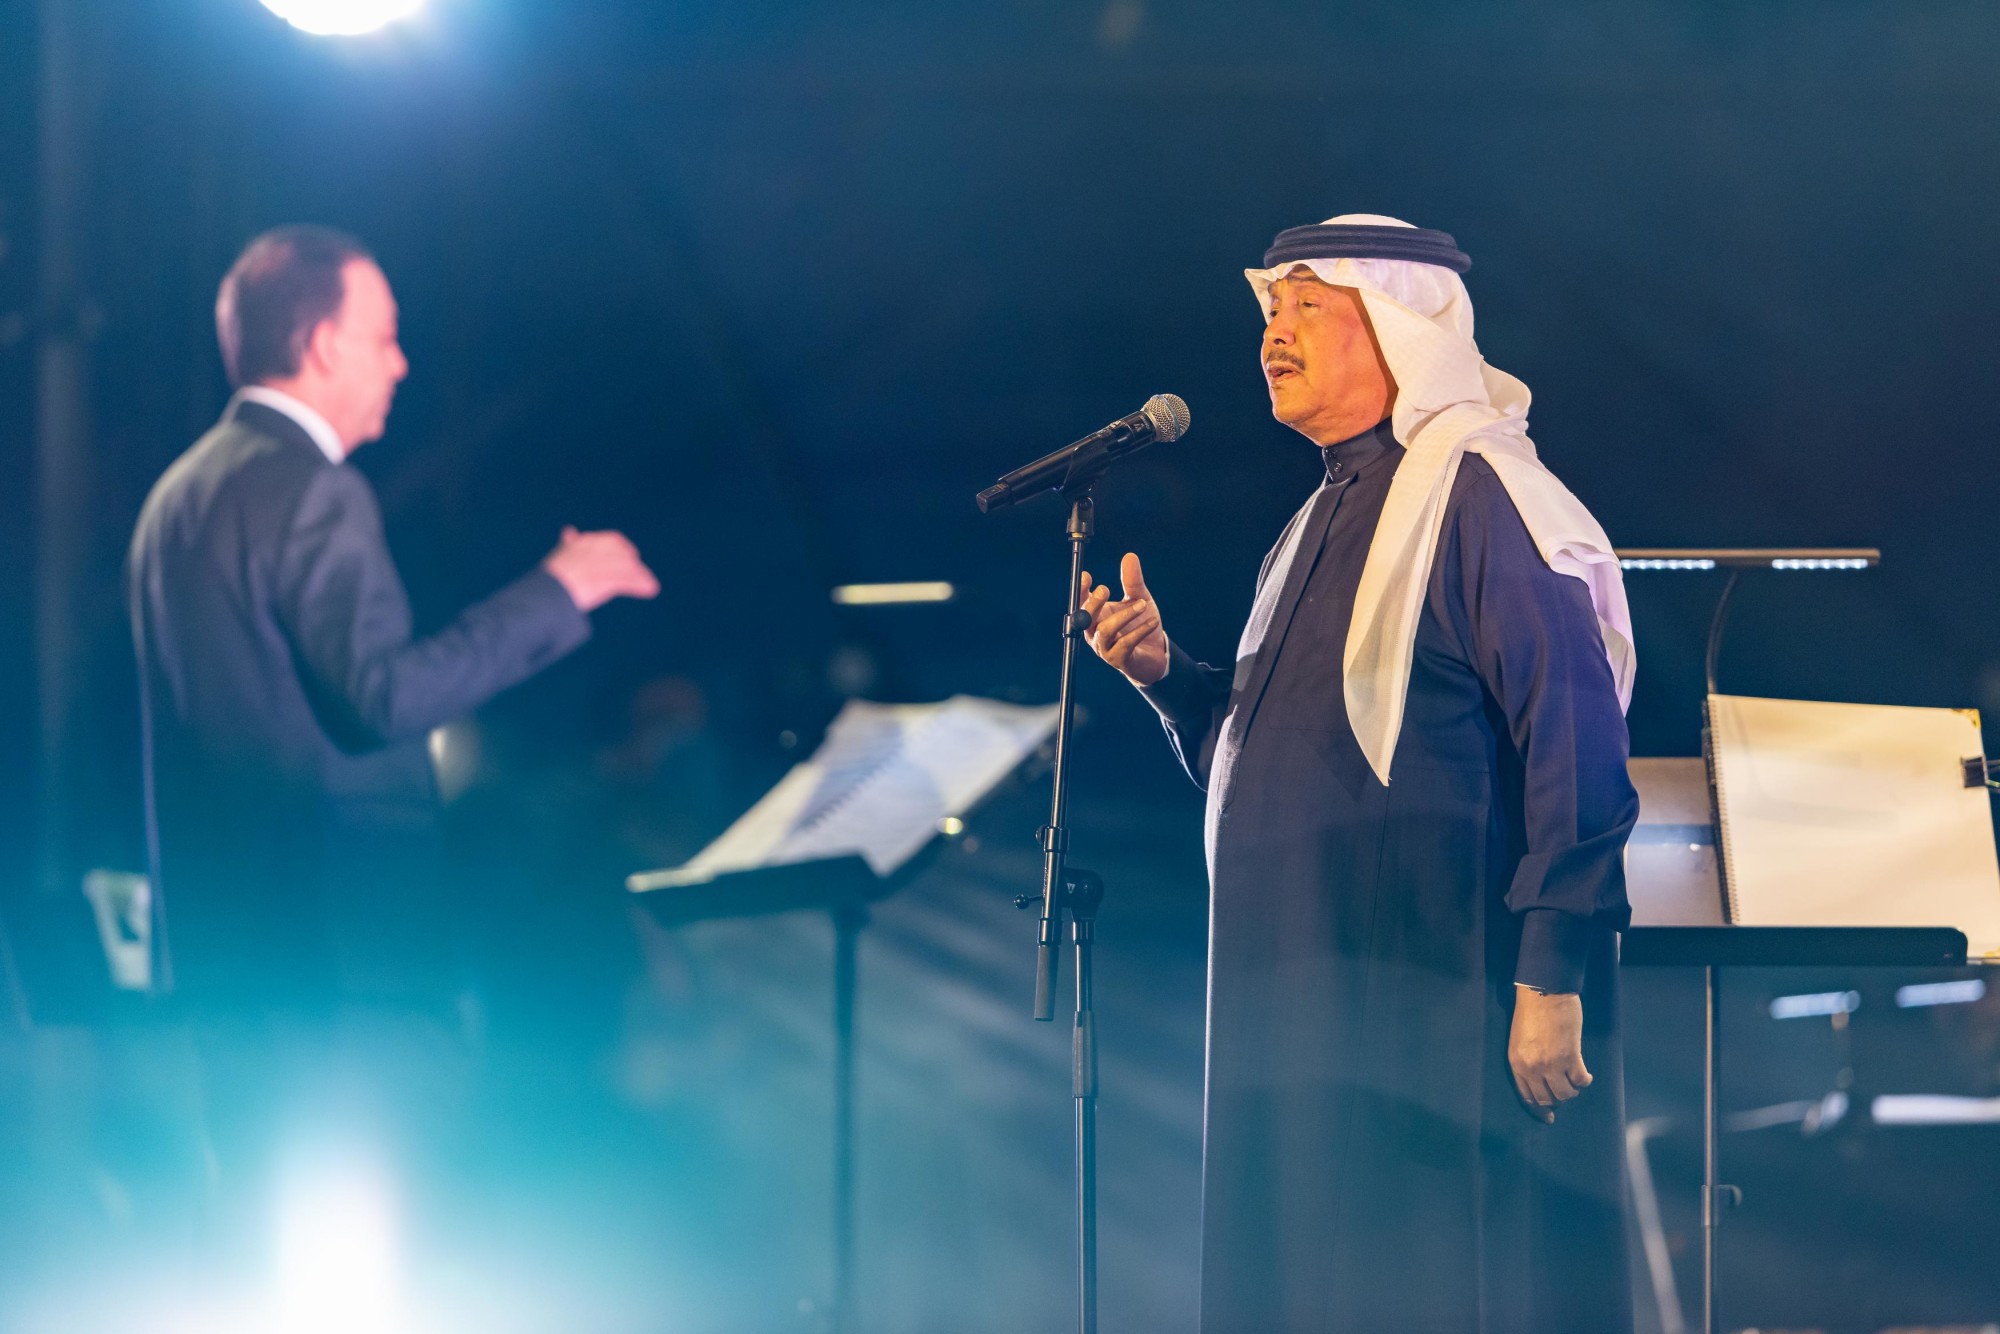 Mohammed Abdo performs at Jubilee Stage during the Kingdom of Saudi Arabia National Day m30543